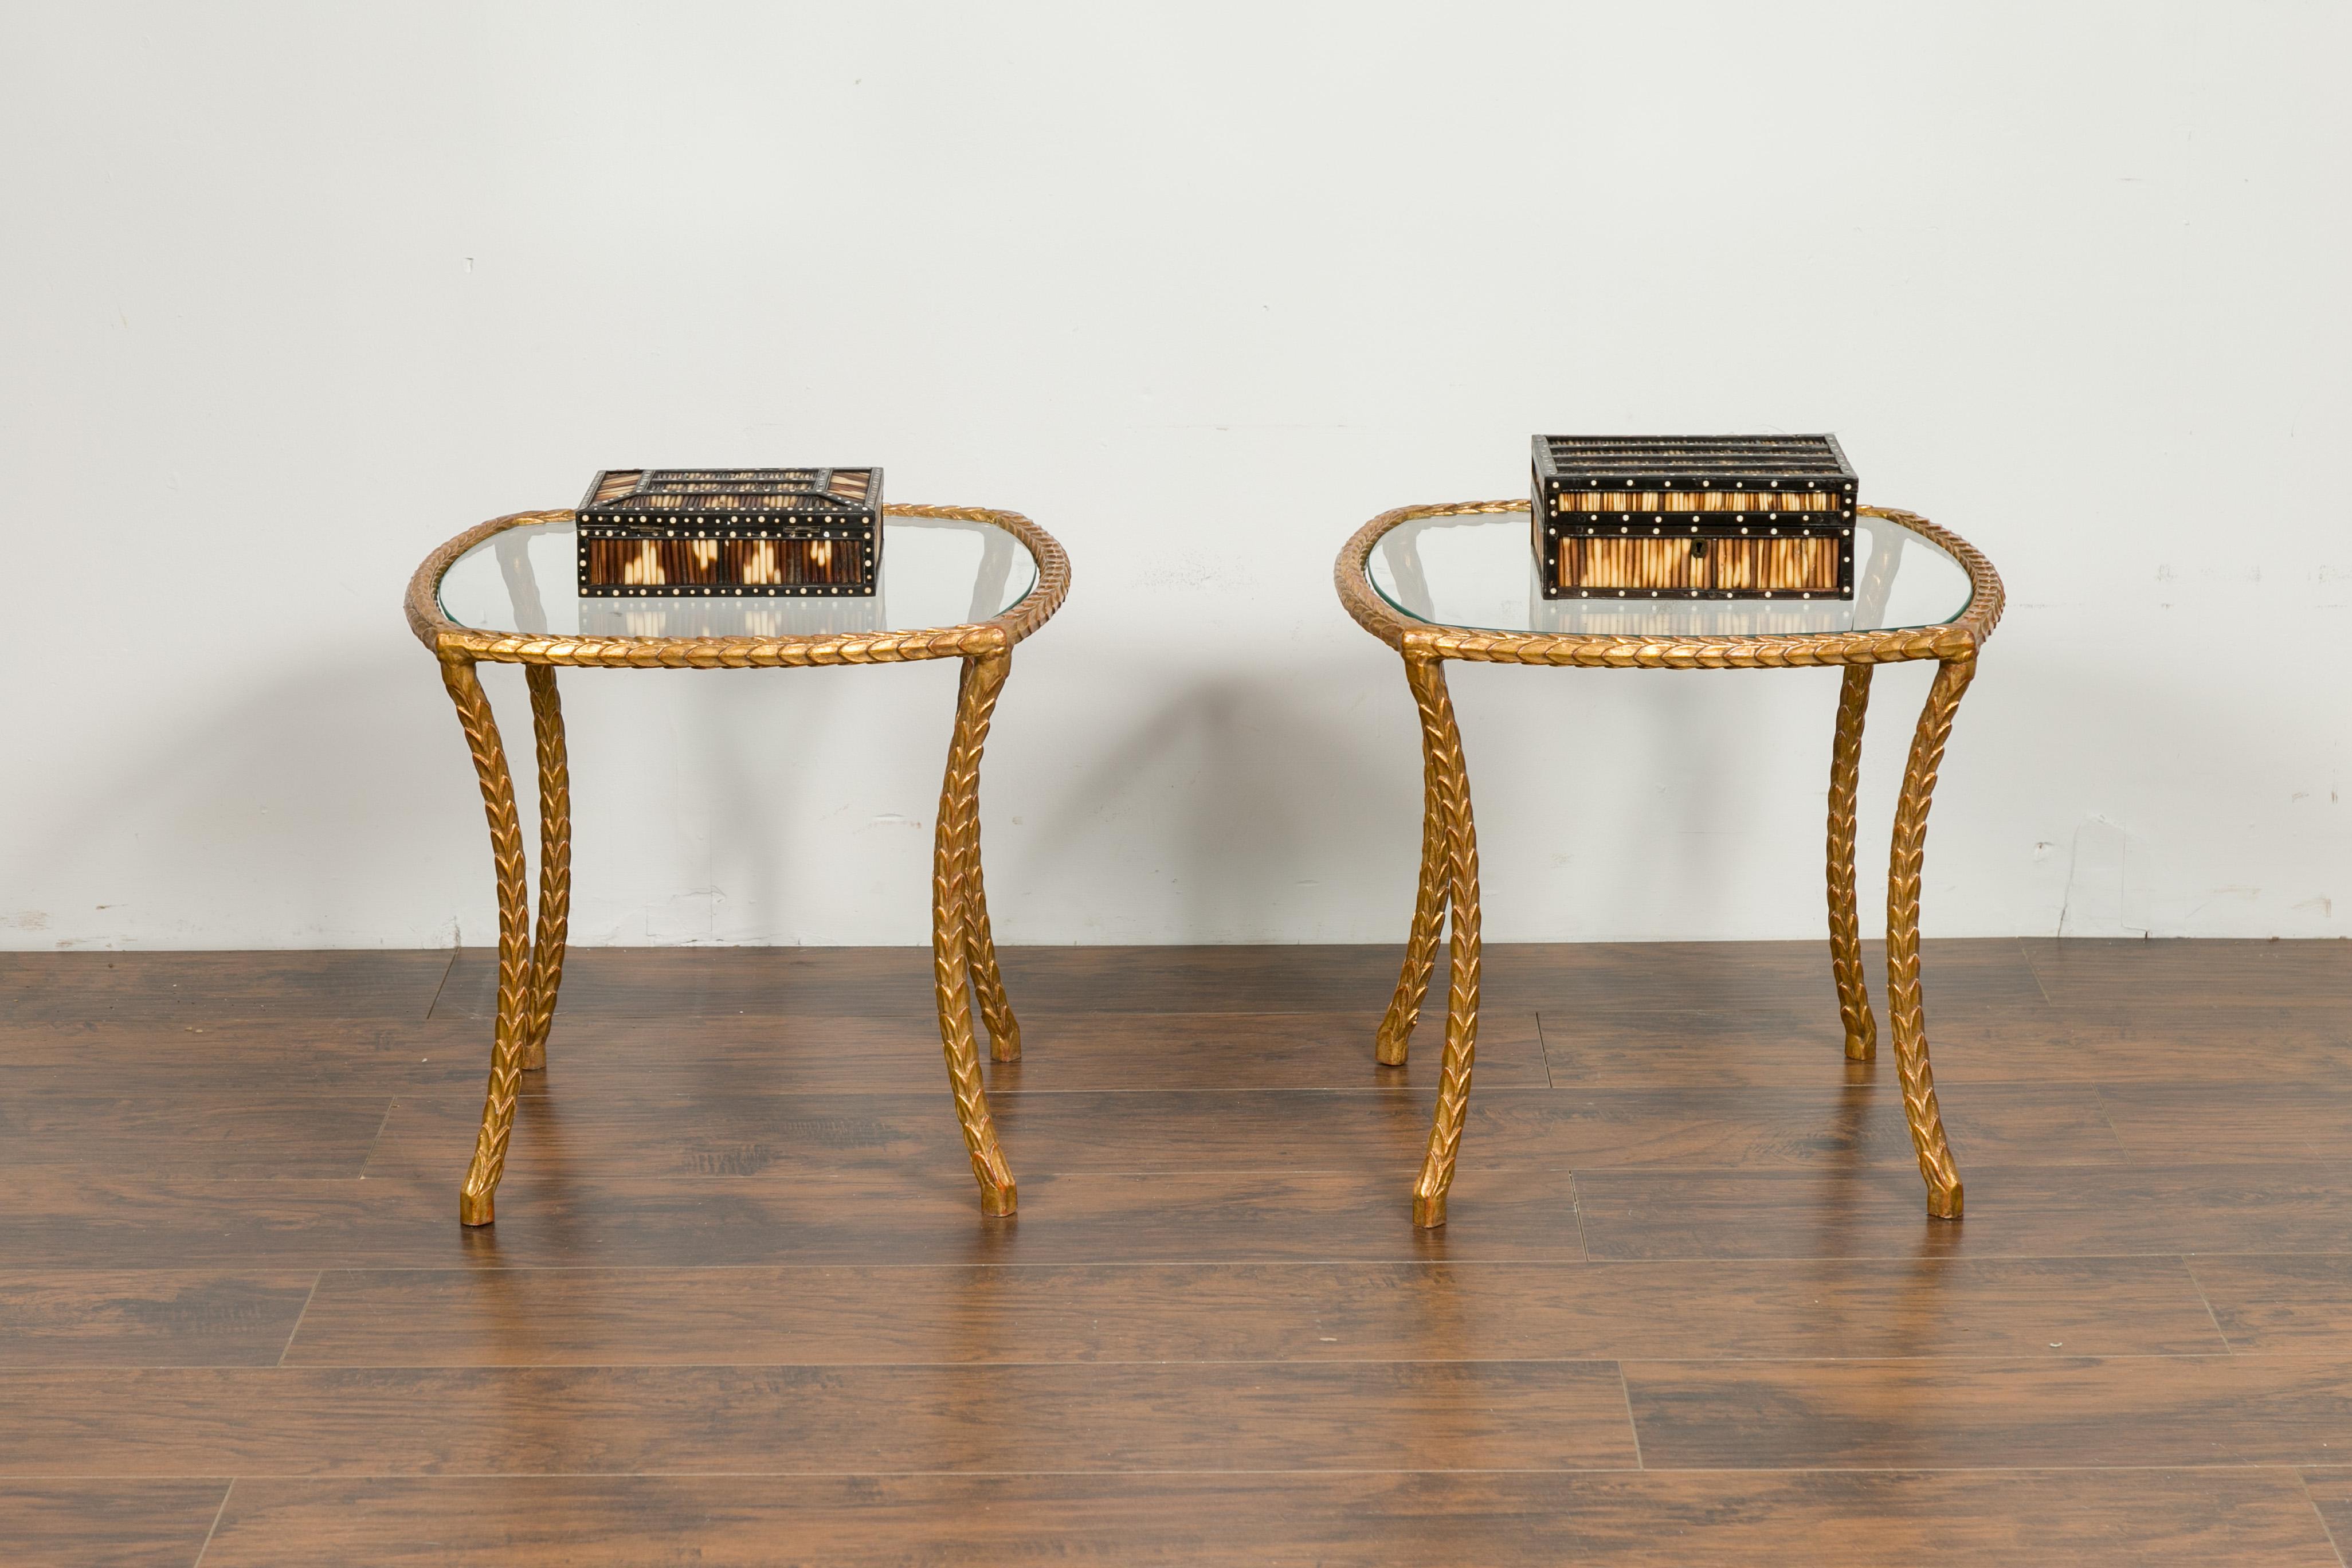 Pair of Midcentury French Maison Baguès Style Gilt Bronze Tables with Glass Tops For Sale 9